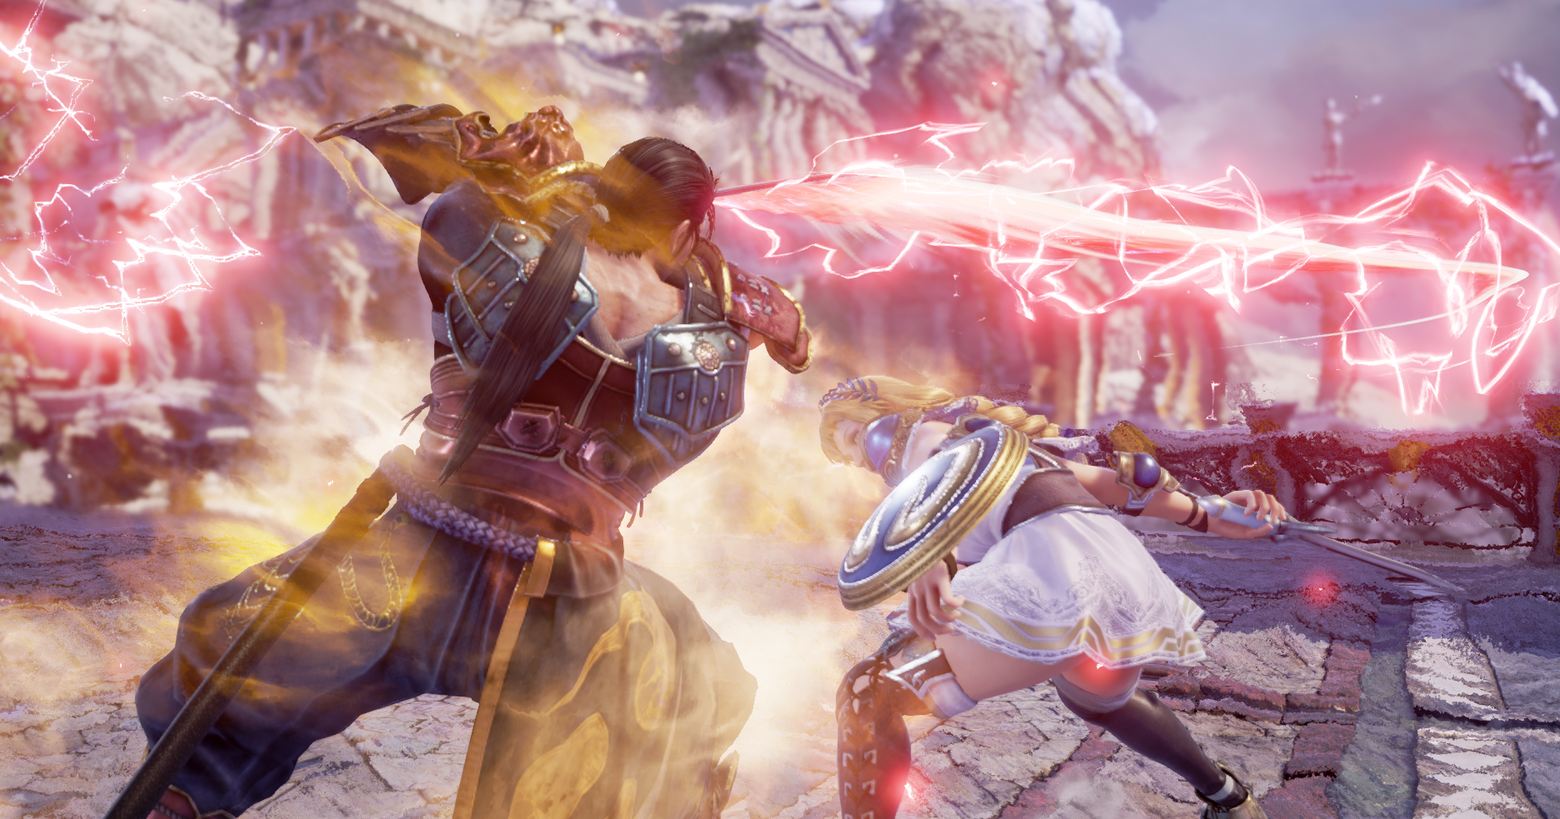 A screenshot of the game Soulcalibur VI is shown. On it, we see two characters in battle gear in an oblique perspective view in the half-total during the day. On the left side of the image, with his back turned towards us, stands a very muscular samurai warrior with a black pot and armor. He is executing a sword attack, which causes a red lightning bolt to run horizontally through the image. slightly in the background directly in front of him and slightly diagonally to the right is a female warrior. She has a long blonde braid, and a white dress, and is equipped with a sword and a round blue and gold shield. She is currently parrying the attack by ducking. The two are in a stone battle arena in the middle of a mountaintop, and in the background, you can see more rocks and temple-like pillars in the blur. With this title, you'll play one of the best fighting games for PC.